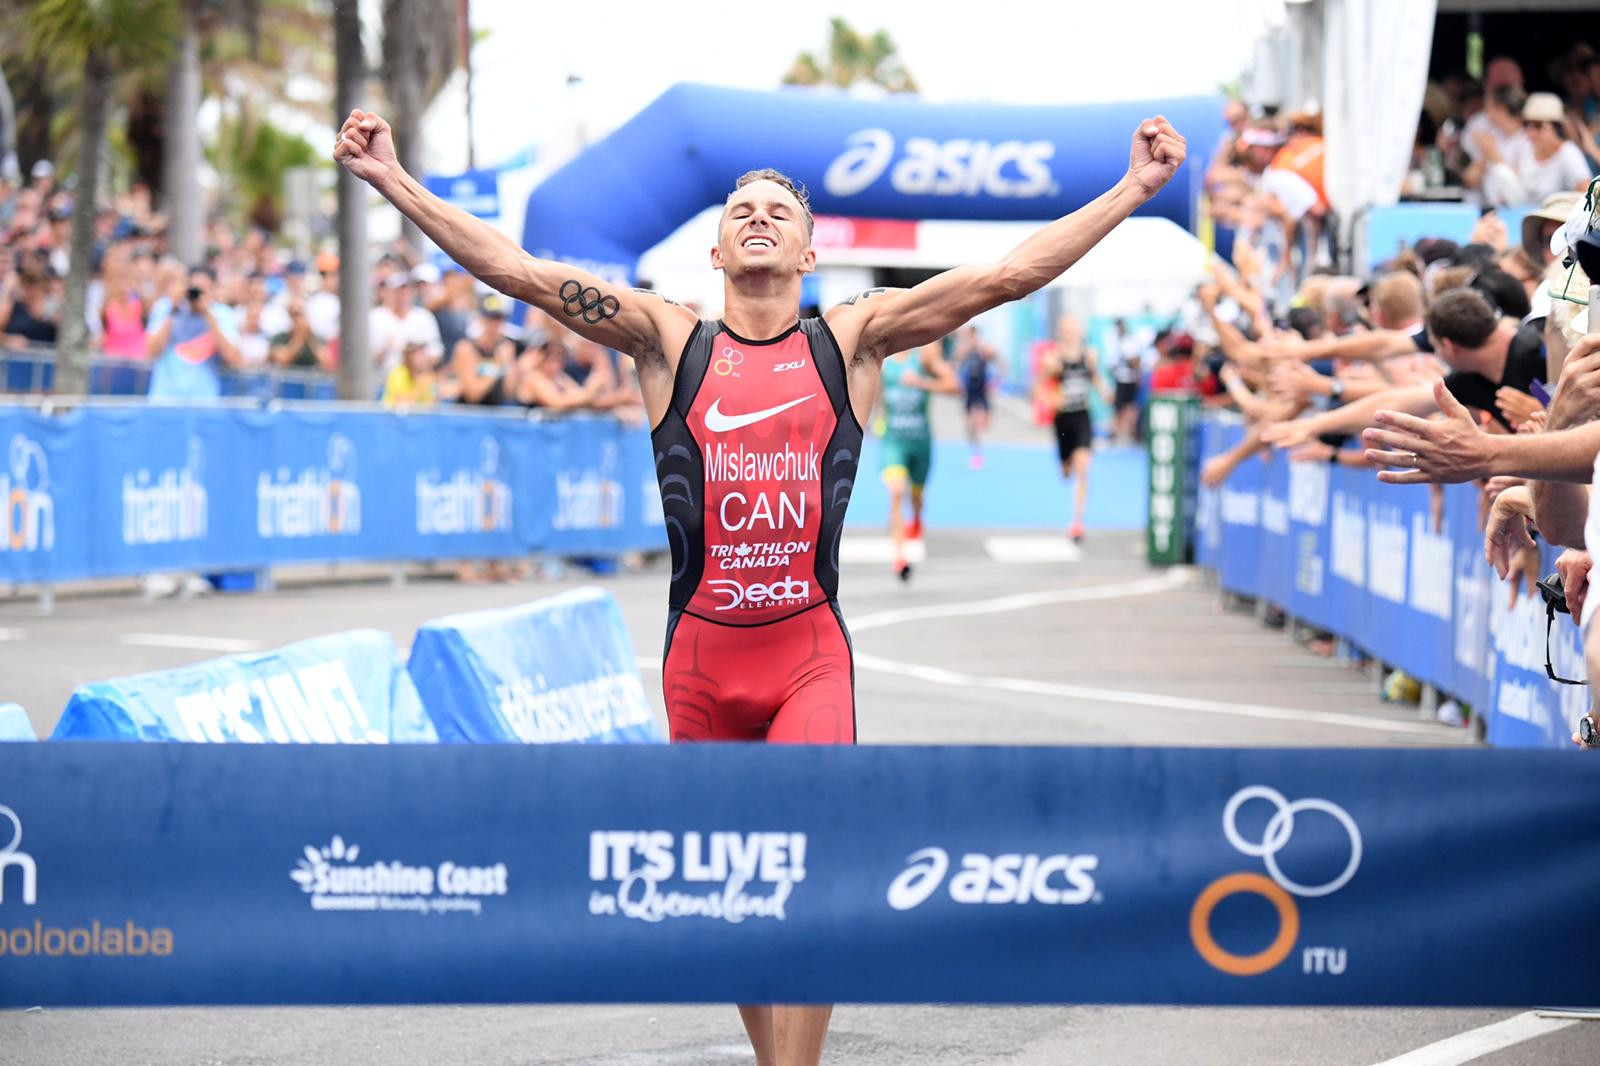 Tyler Mislawchuk of Canada wins his first ITU Triathlon World Cup title as he finishes in Mooloolaba, Queensland ©ITU